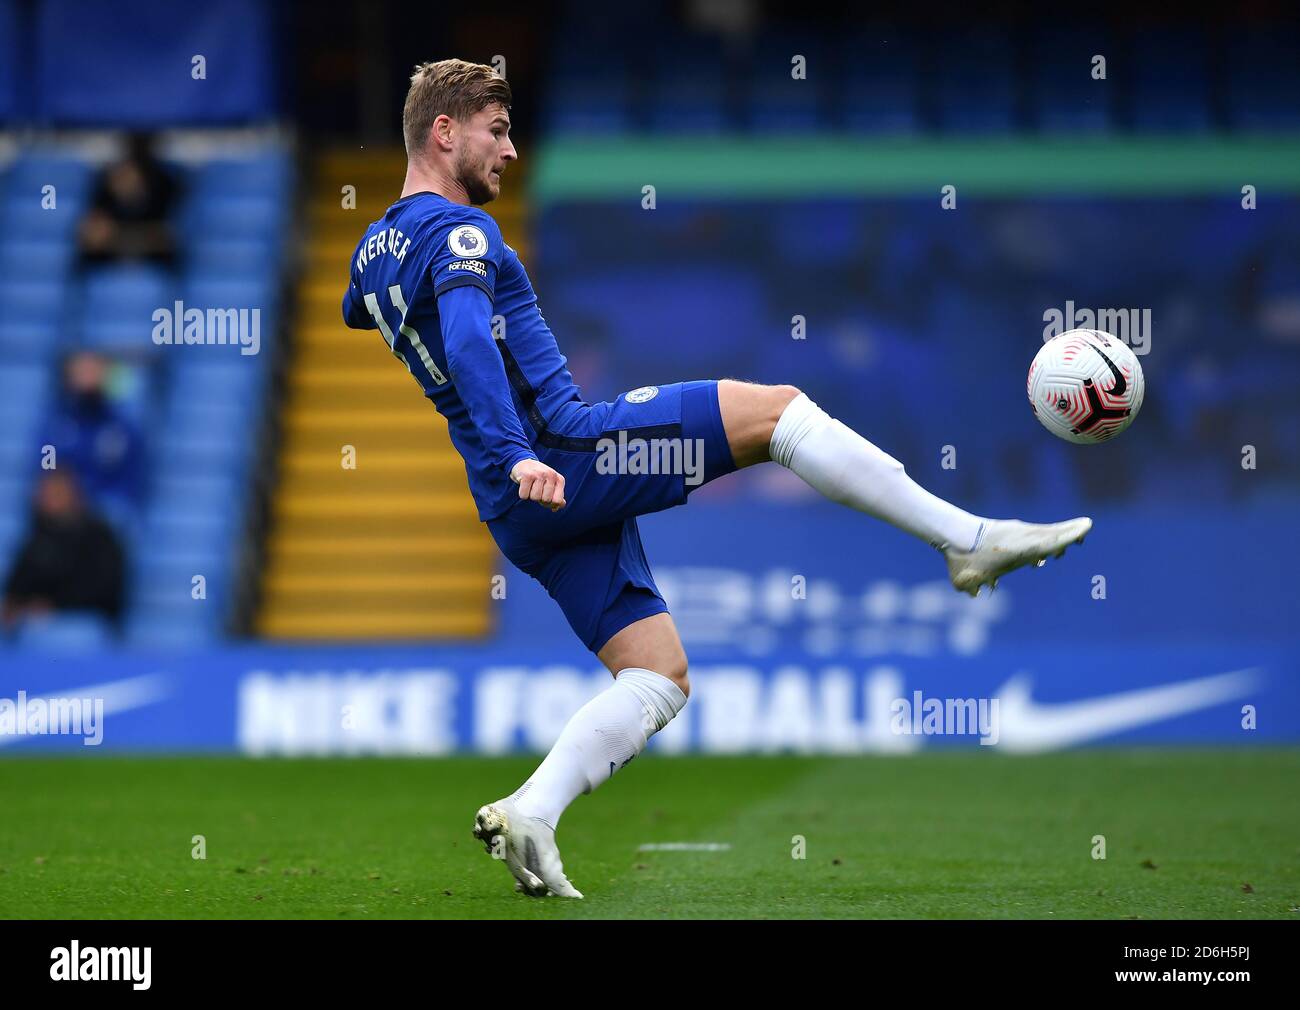 Chelsea's Timo Werner lobs the goalkeeper prior to scoring his side's second goal of the game during the Premier League match at Stamford Bridge, London. Stock Photo